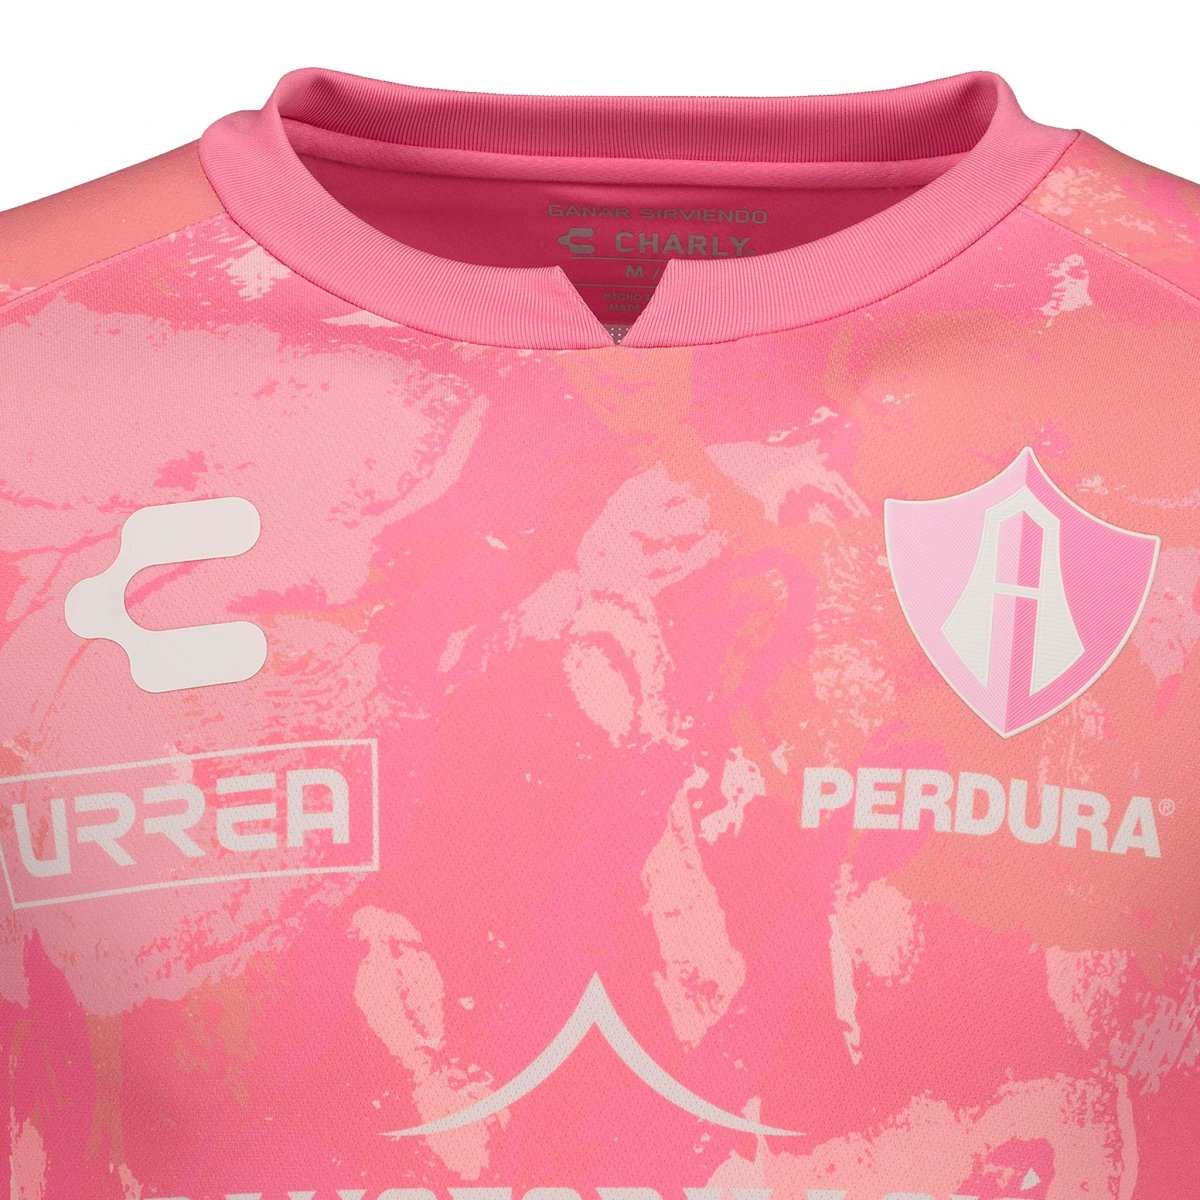 Jersey Charly Atlas Hombre 5018975030